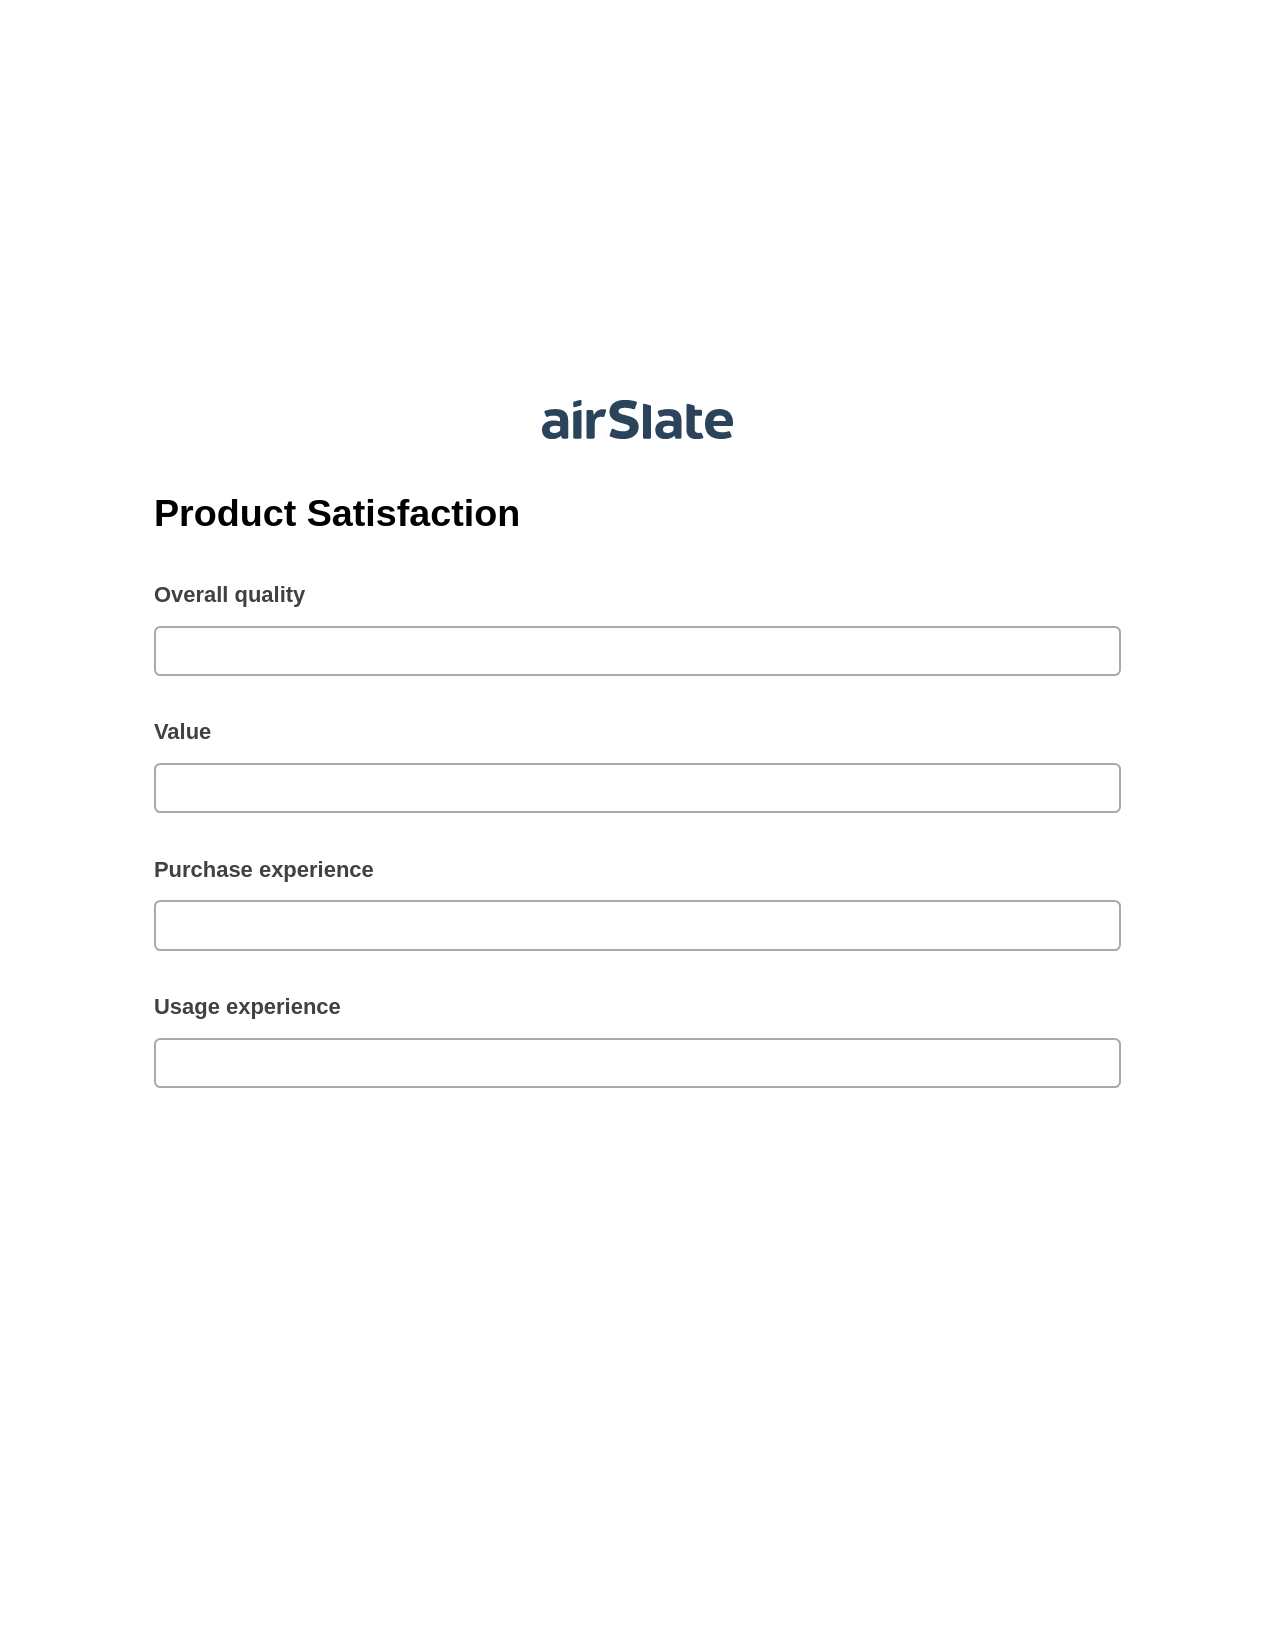 Multirole Product Satisfaction Pre-fill from Salesforce Record Bot, Create slate from another Flow Bot, Export to Excel 365 Bot